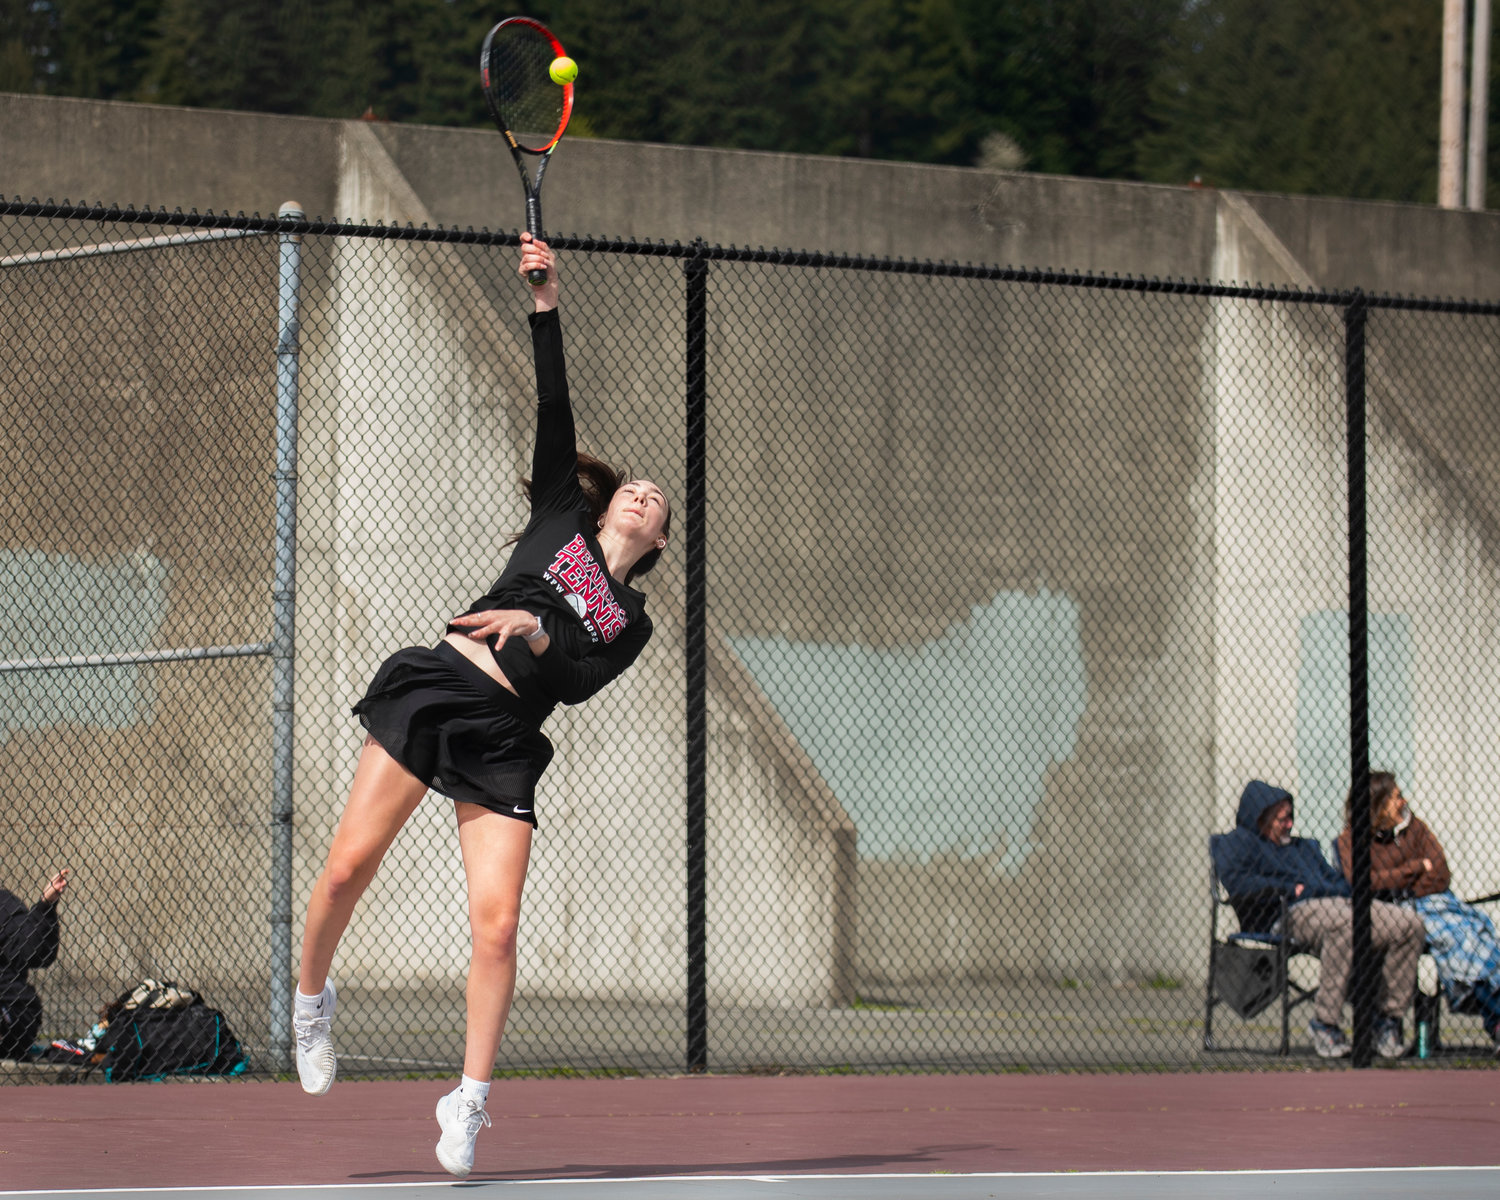 Claire Kuykendall, first singles player for W.F. West, serves against Centralia in Chehalis on Friday.